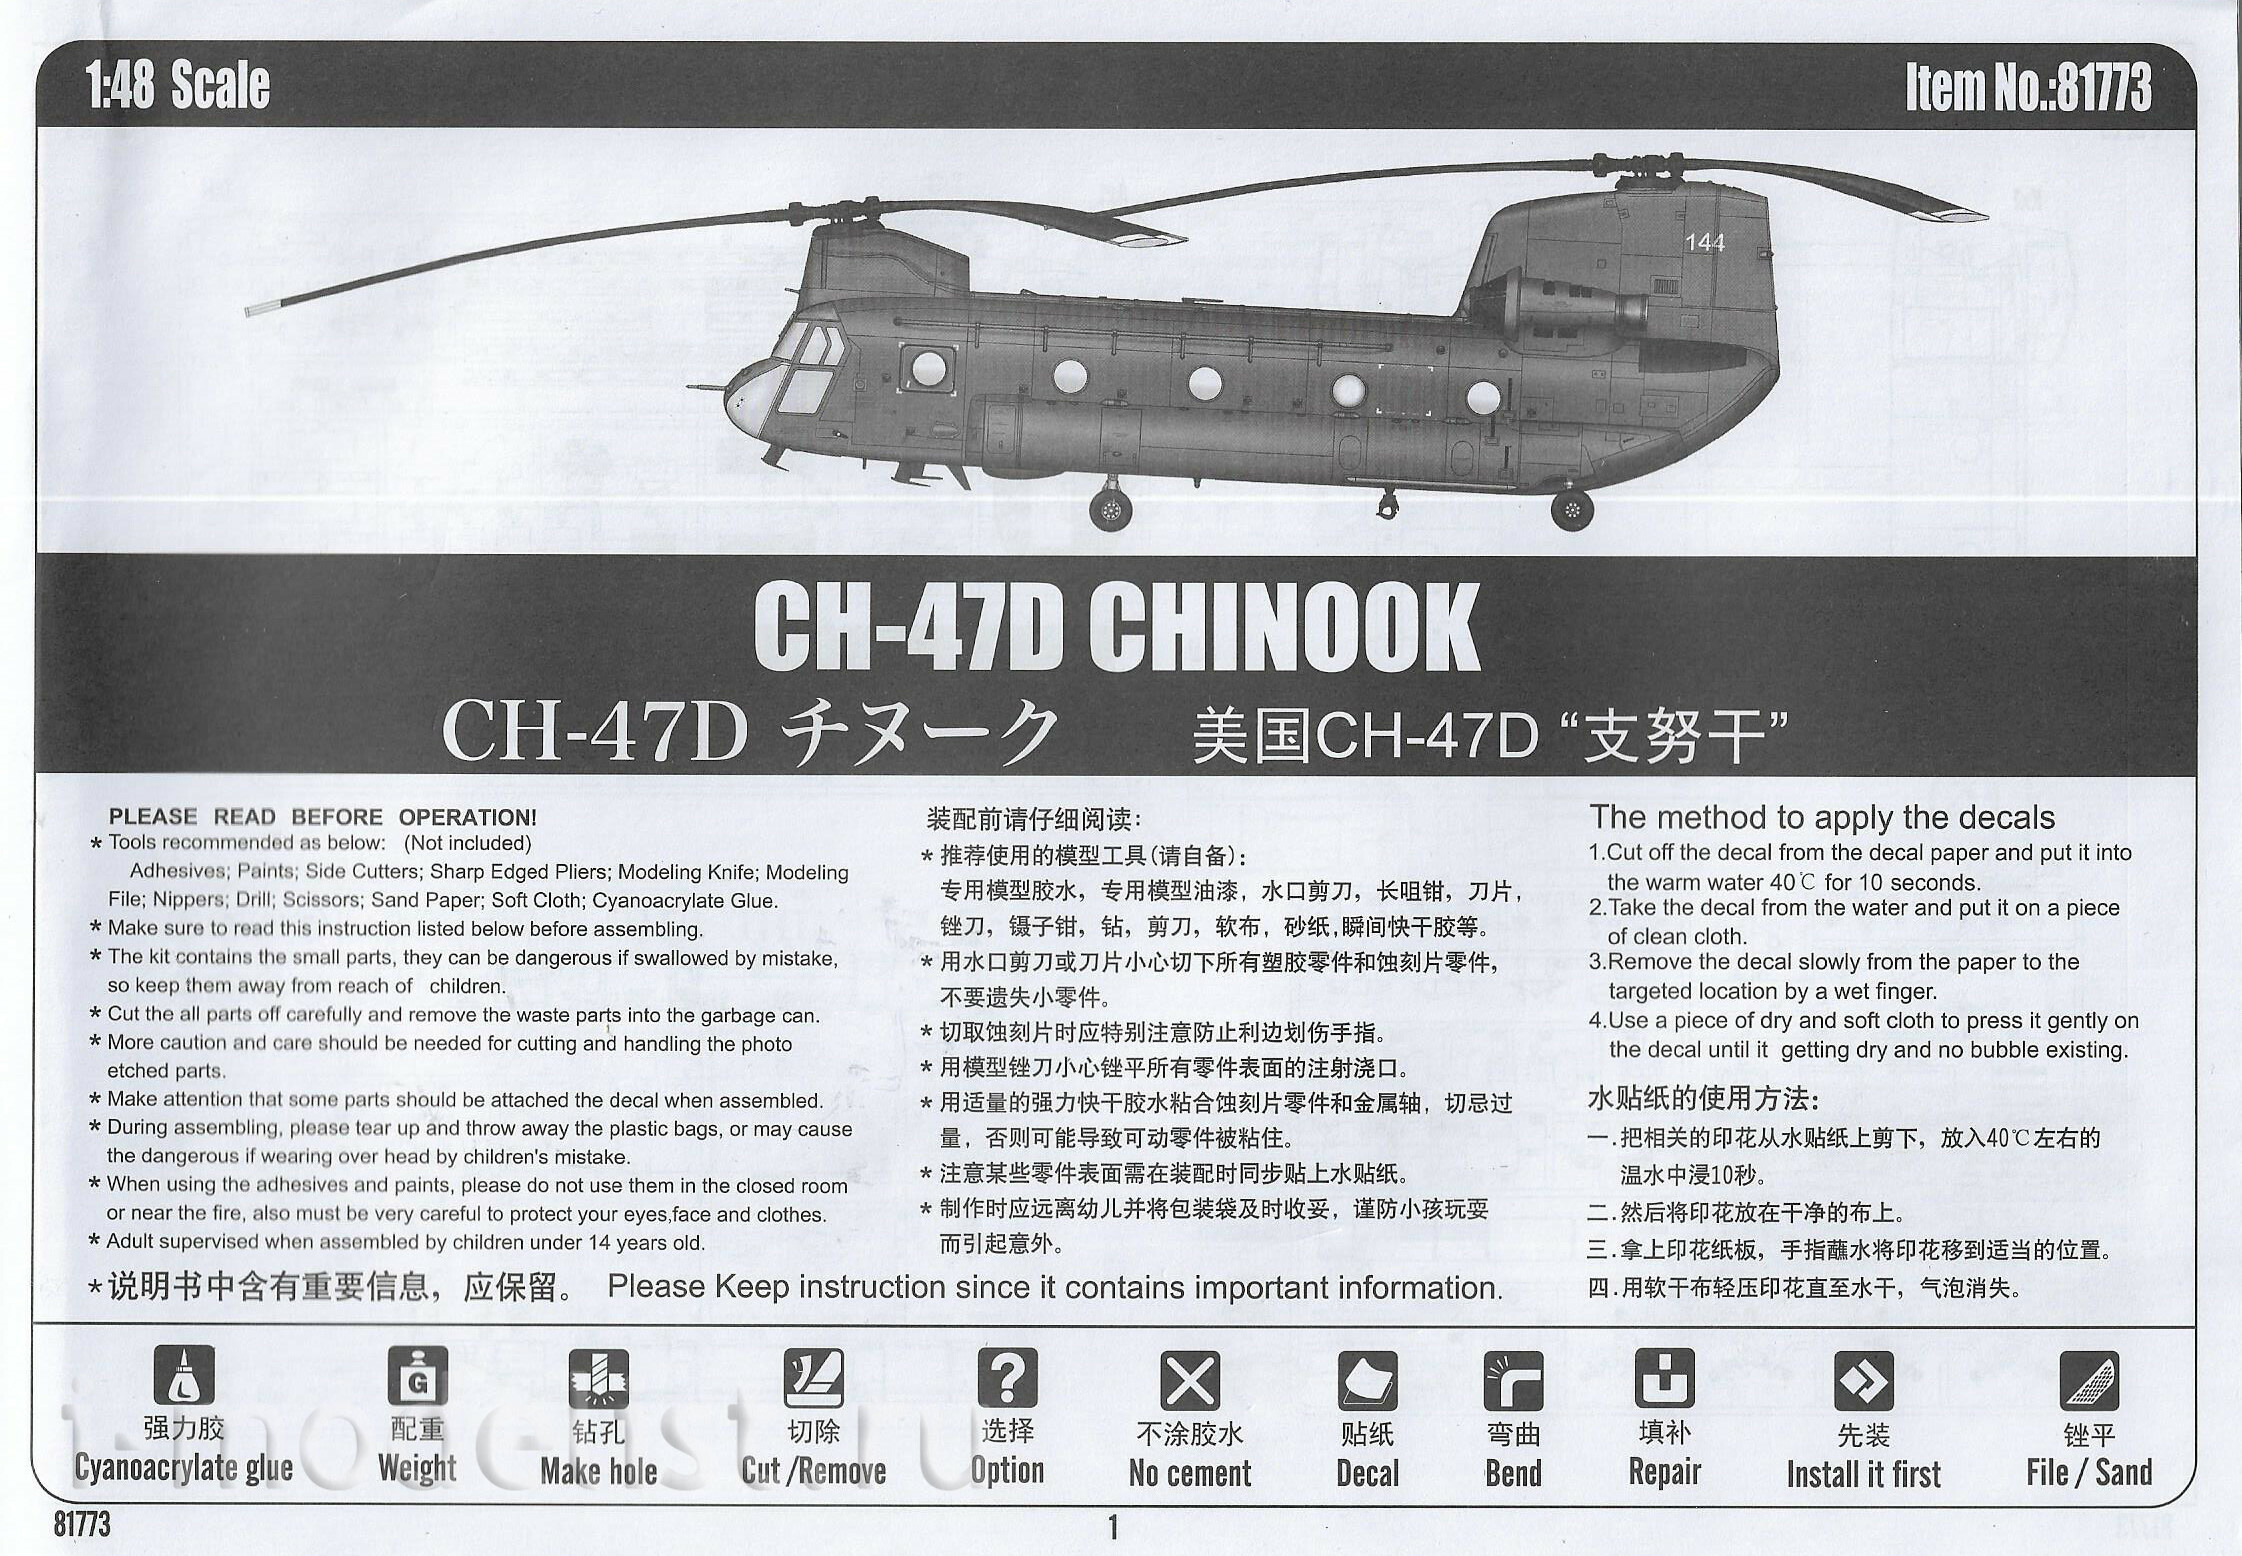 81773 HobbyBoss 1/48 Helicopter CH-47D Chinook